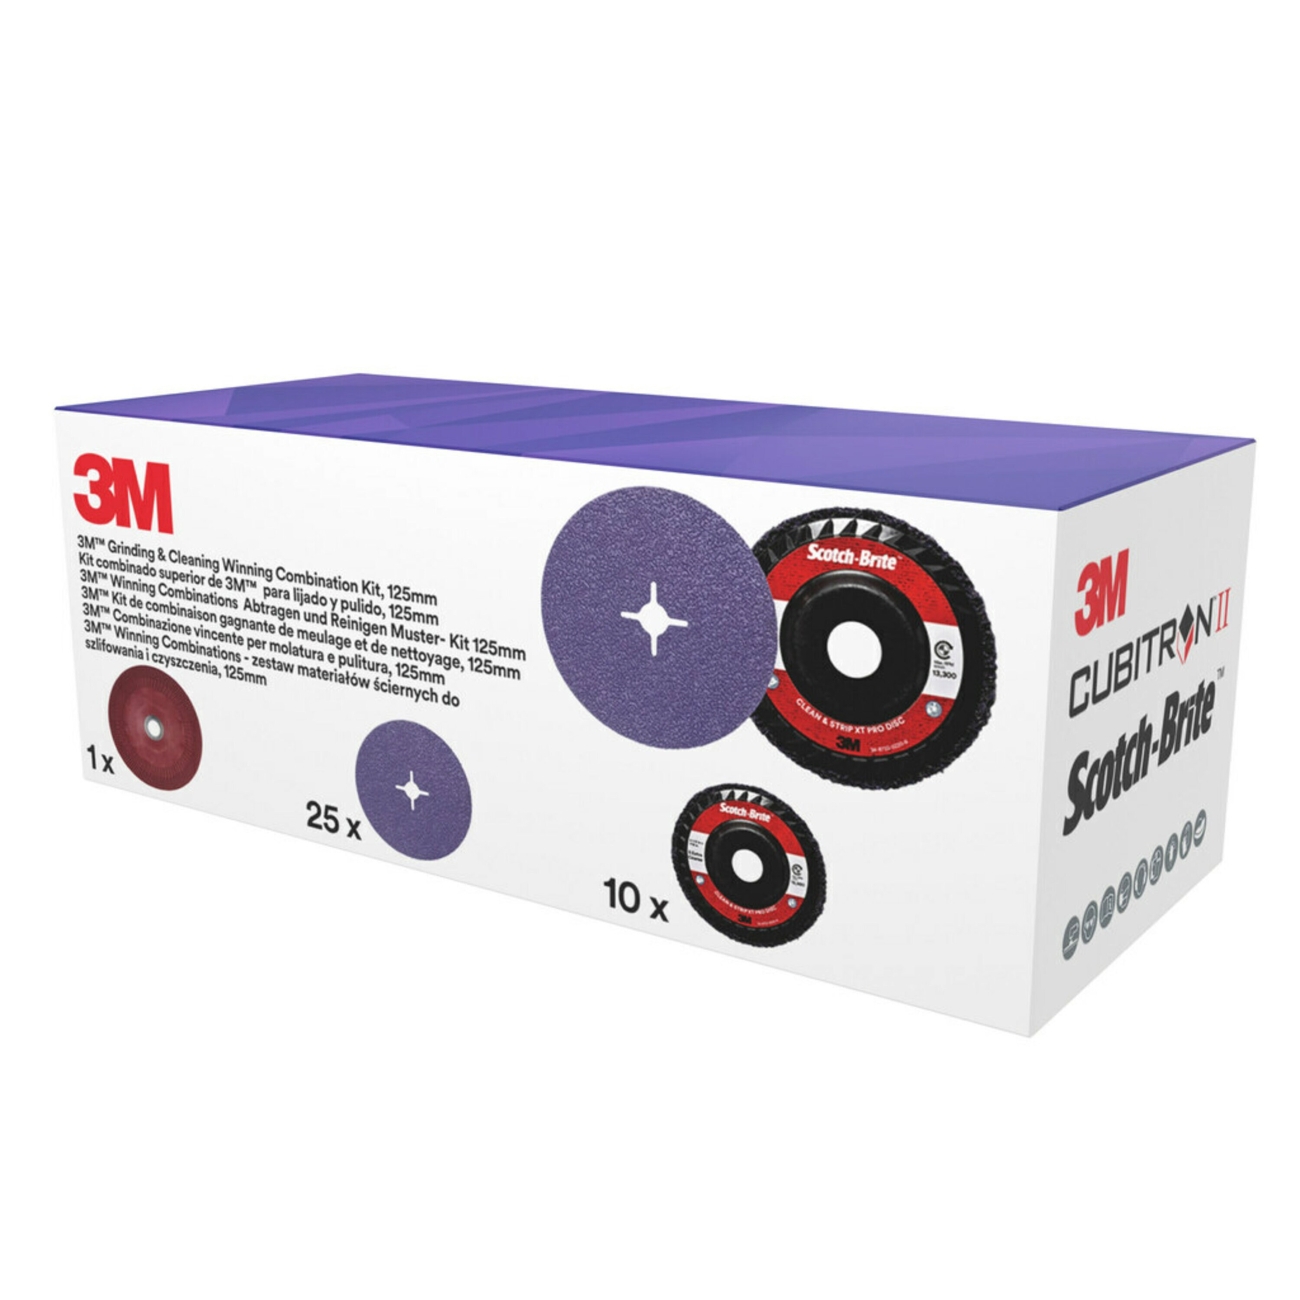 3M sanding and cleaning set, 25x 125 mm 3M Cubitron II fiber disc 982CX P36 and 10x 3M Scotch-Brite Clean and Strip XT Pro S coarse cleaning disc 125 mm , with 1x high-performance fiber disc backing pad